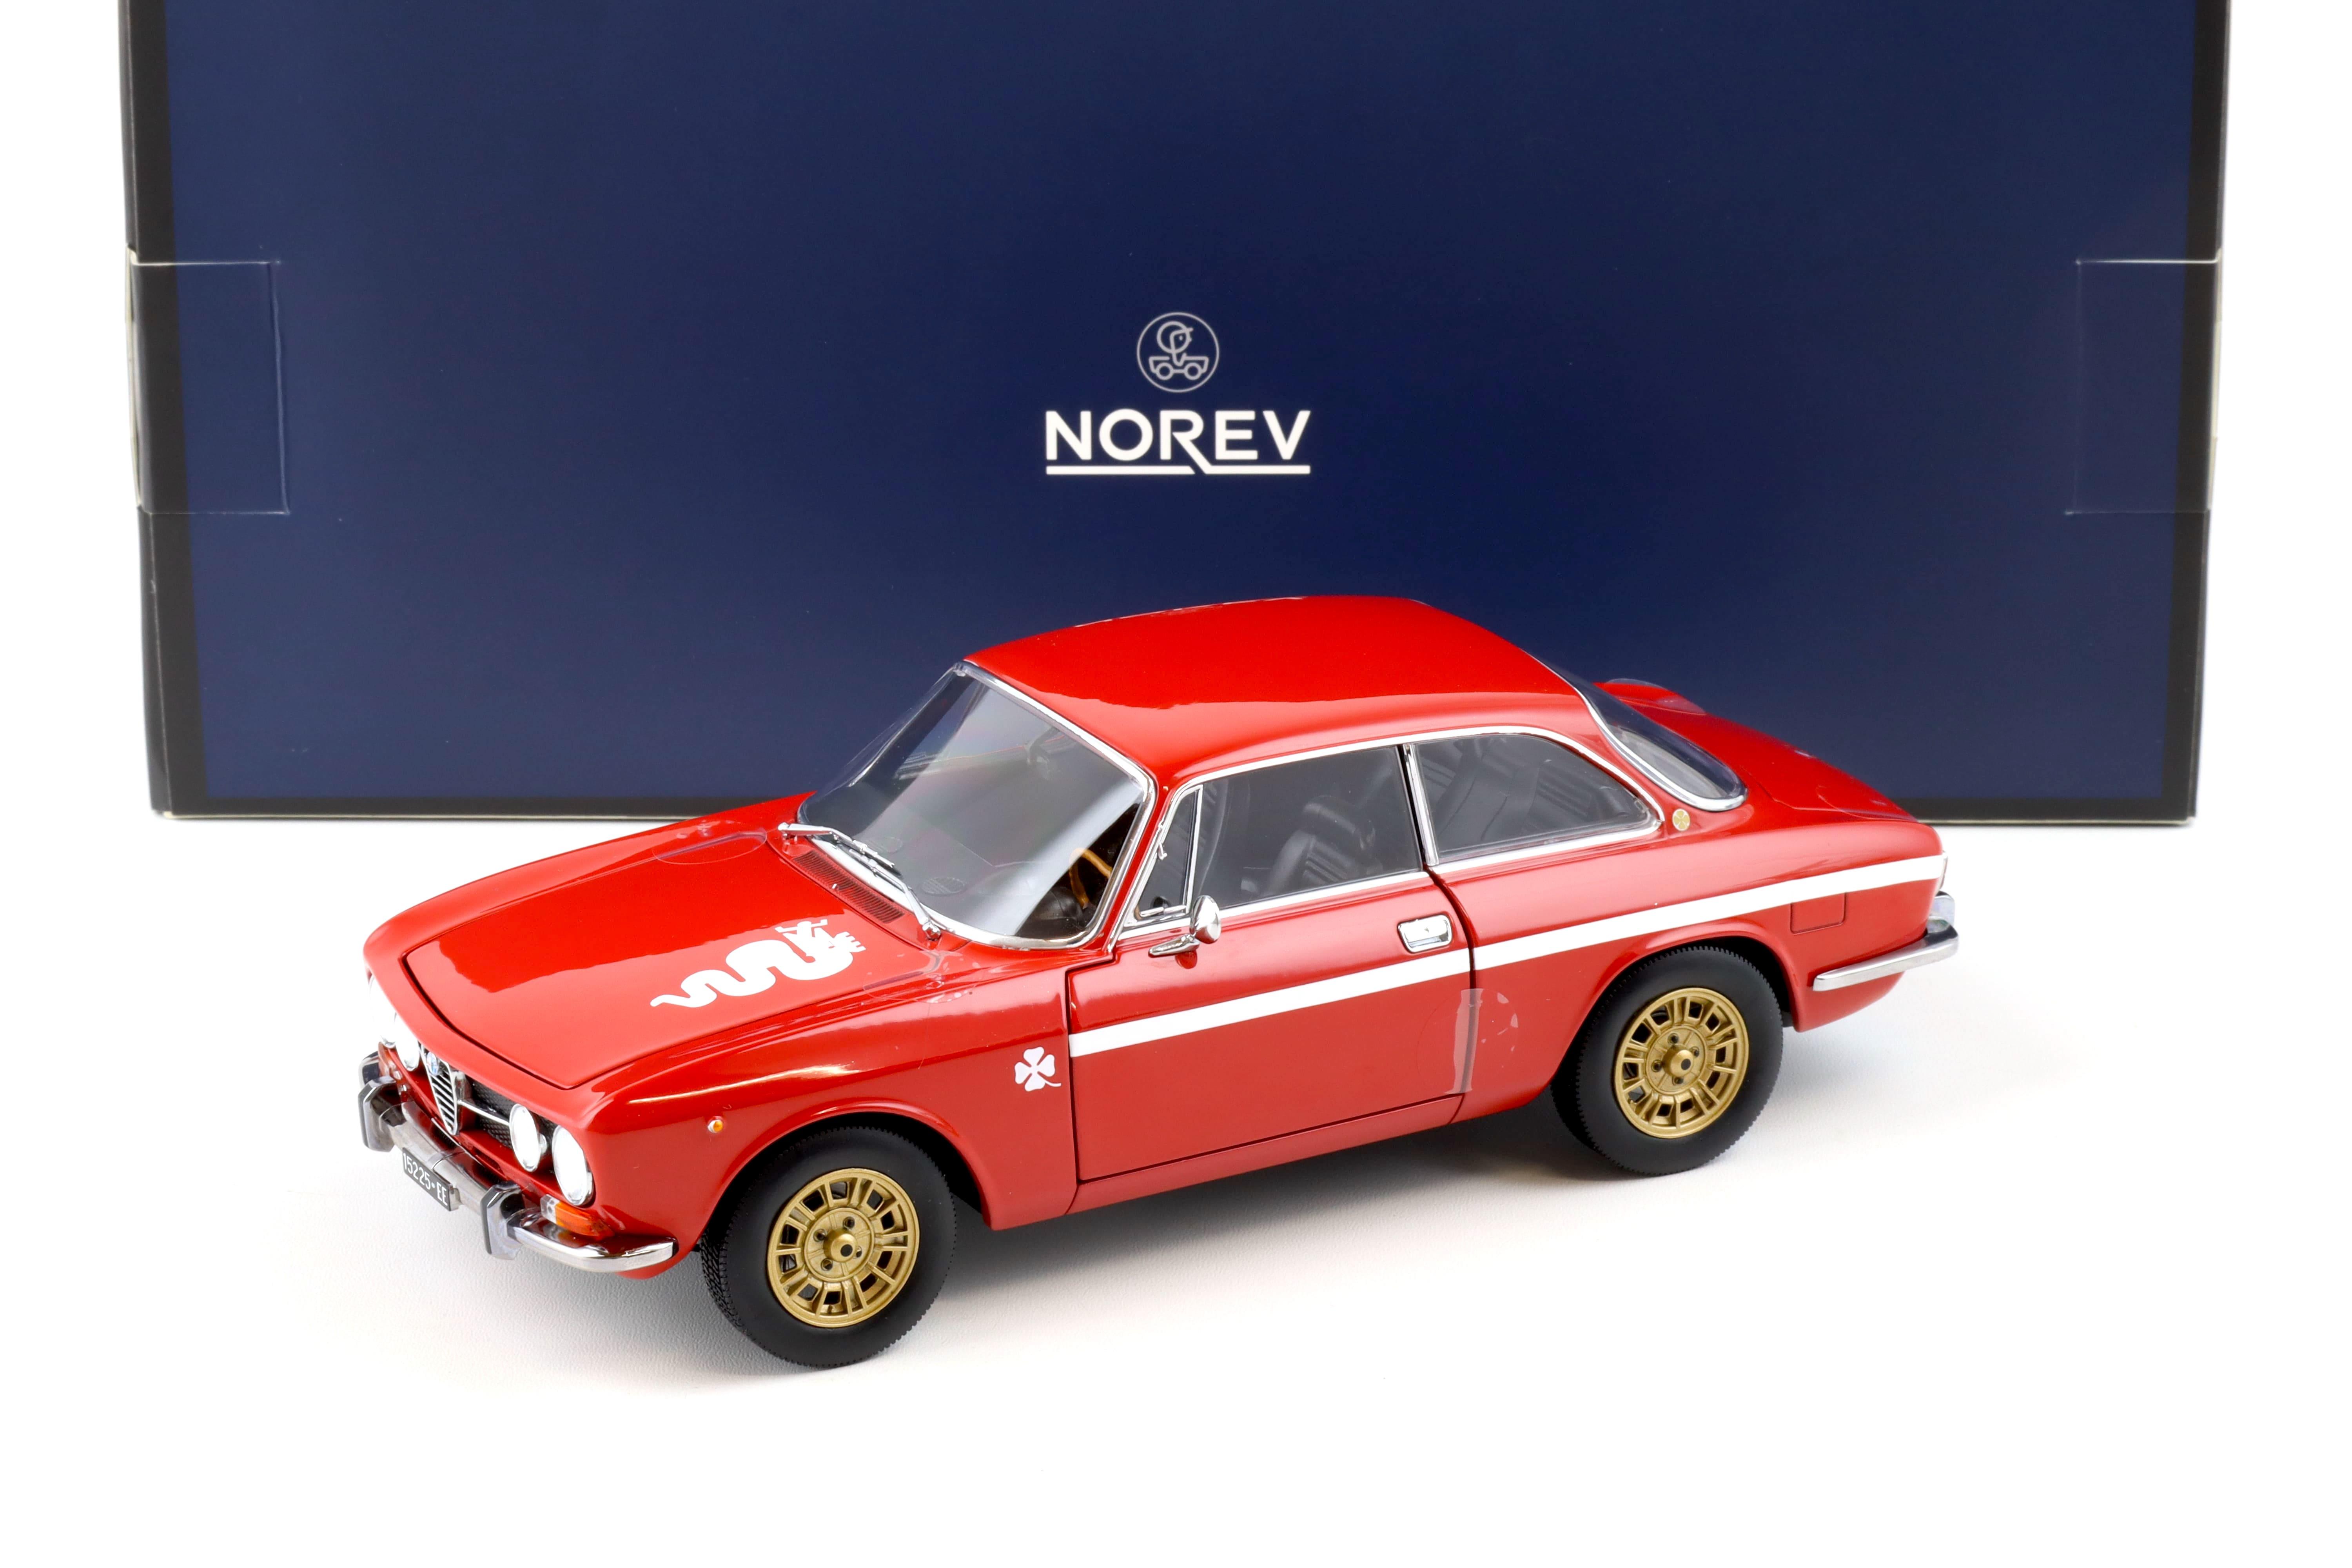 1:18 Norev Alfa Romeo 1750 GTV Coupe 1970 red - Limited 200 pcs.